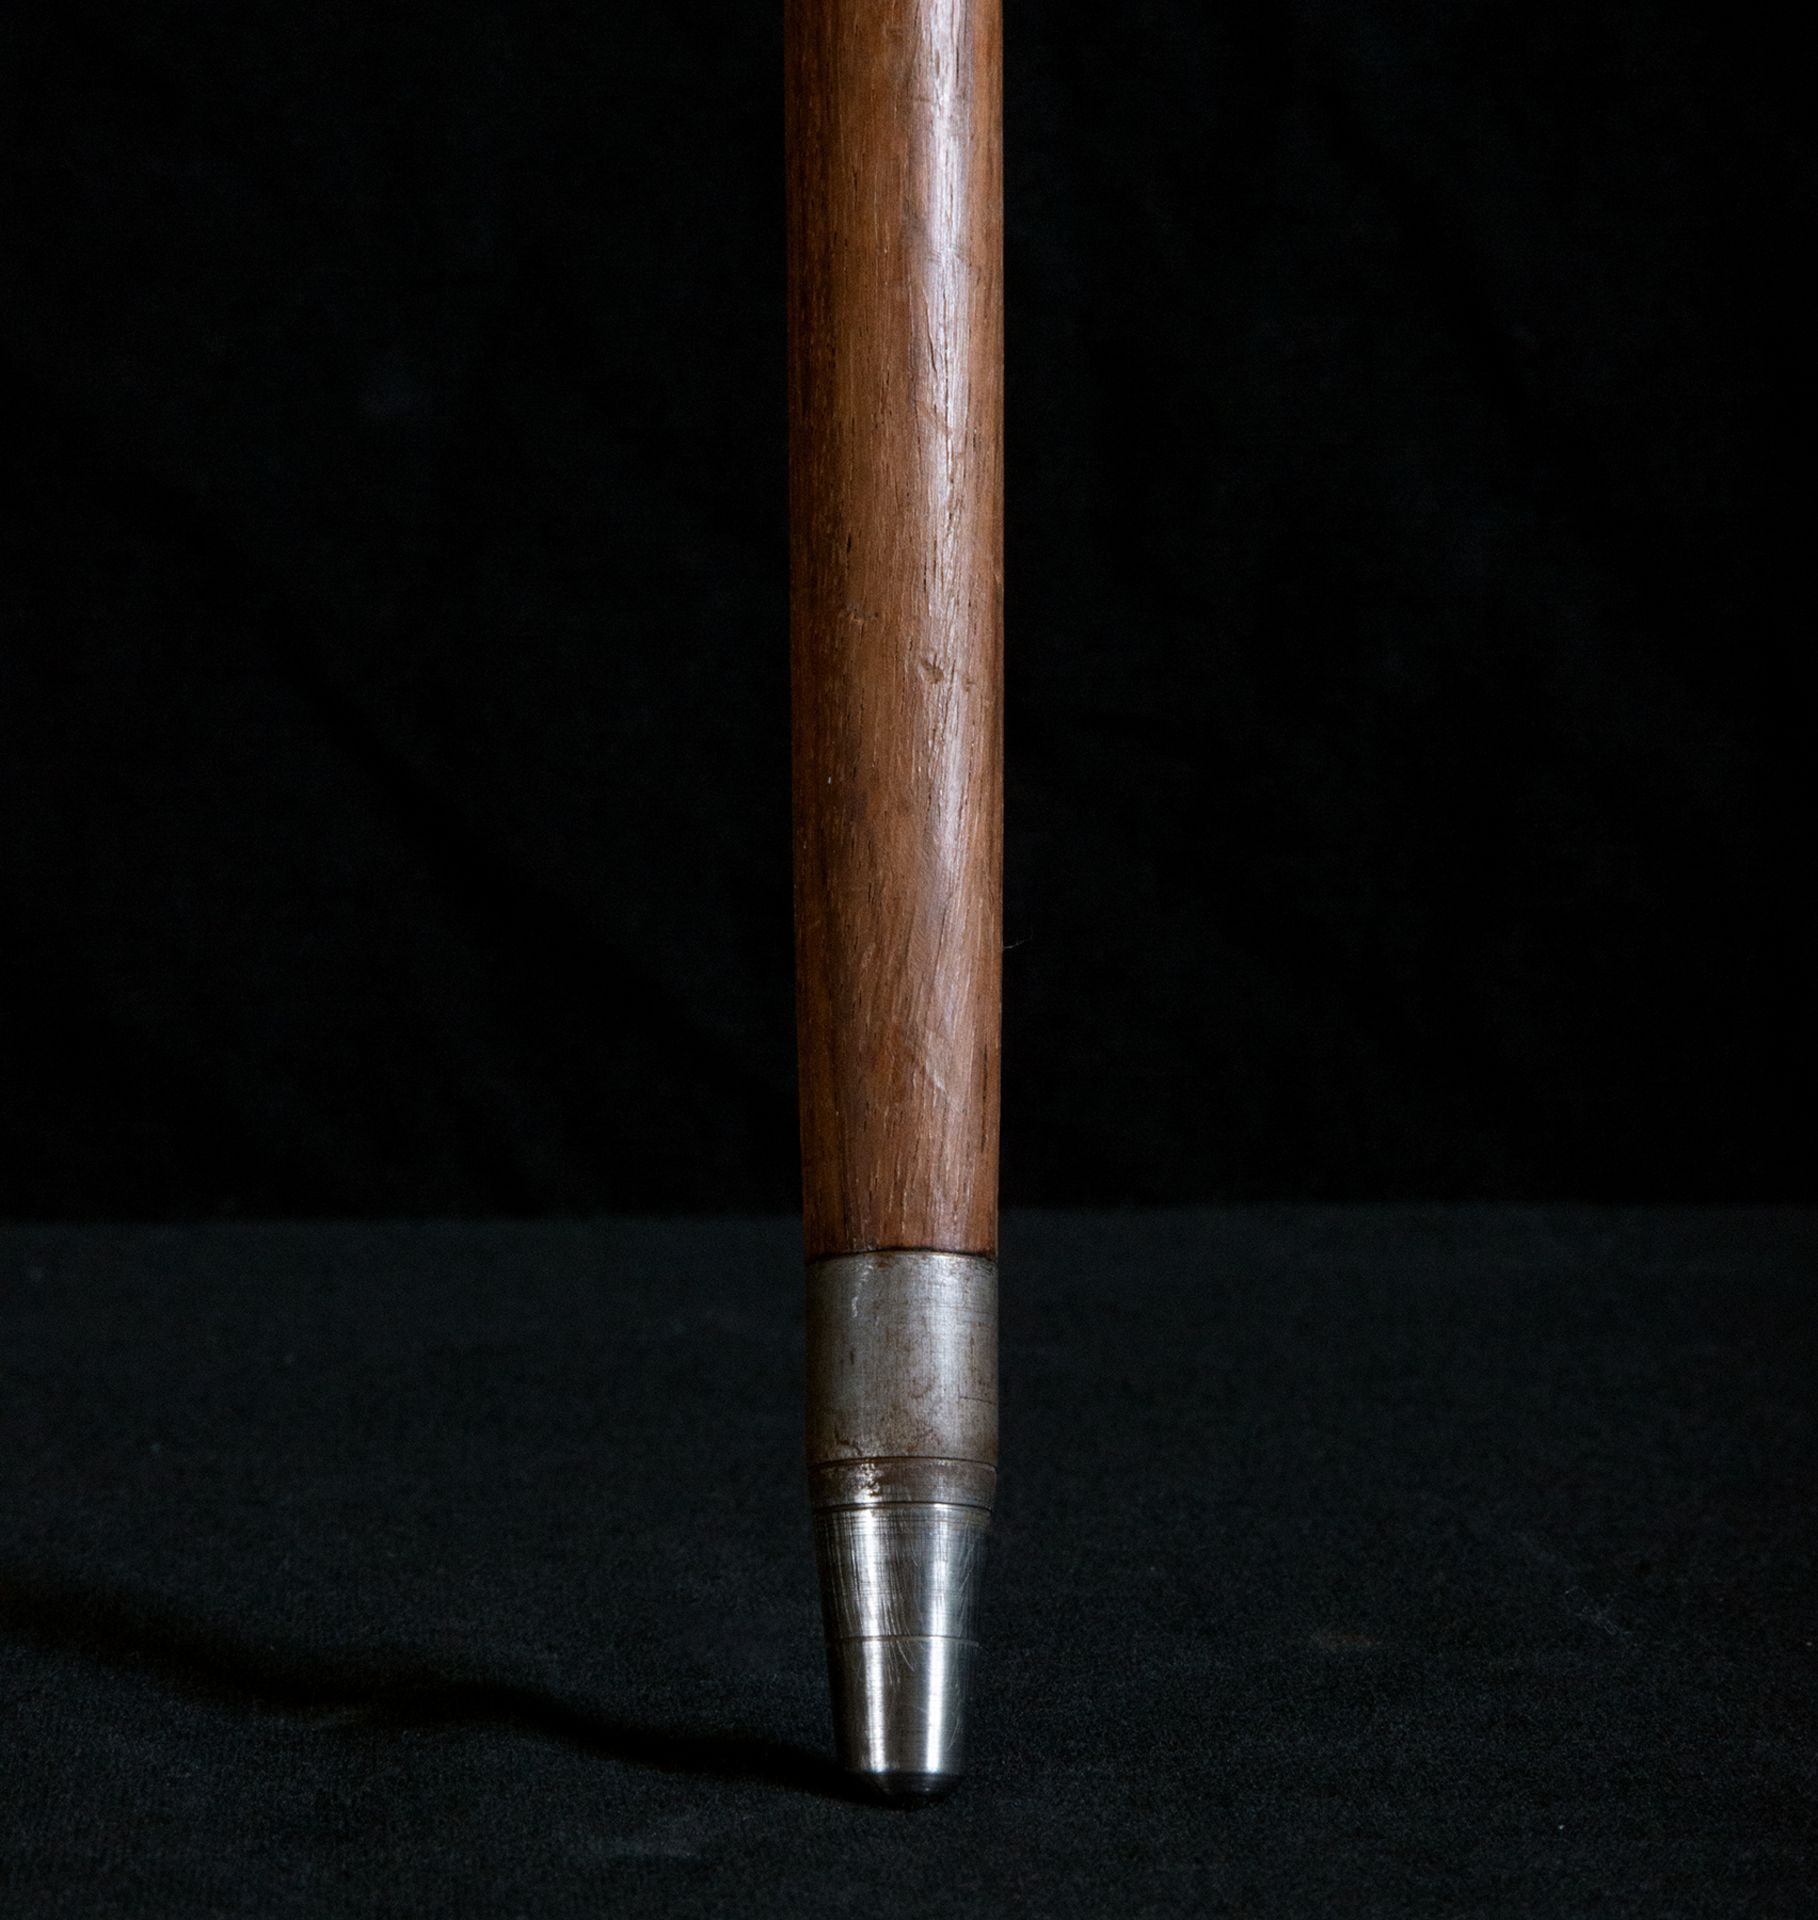 Colonial Jamaican walking stick with monkey handle and heraldic shield, 19th century - Image 4 of 4